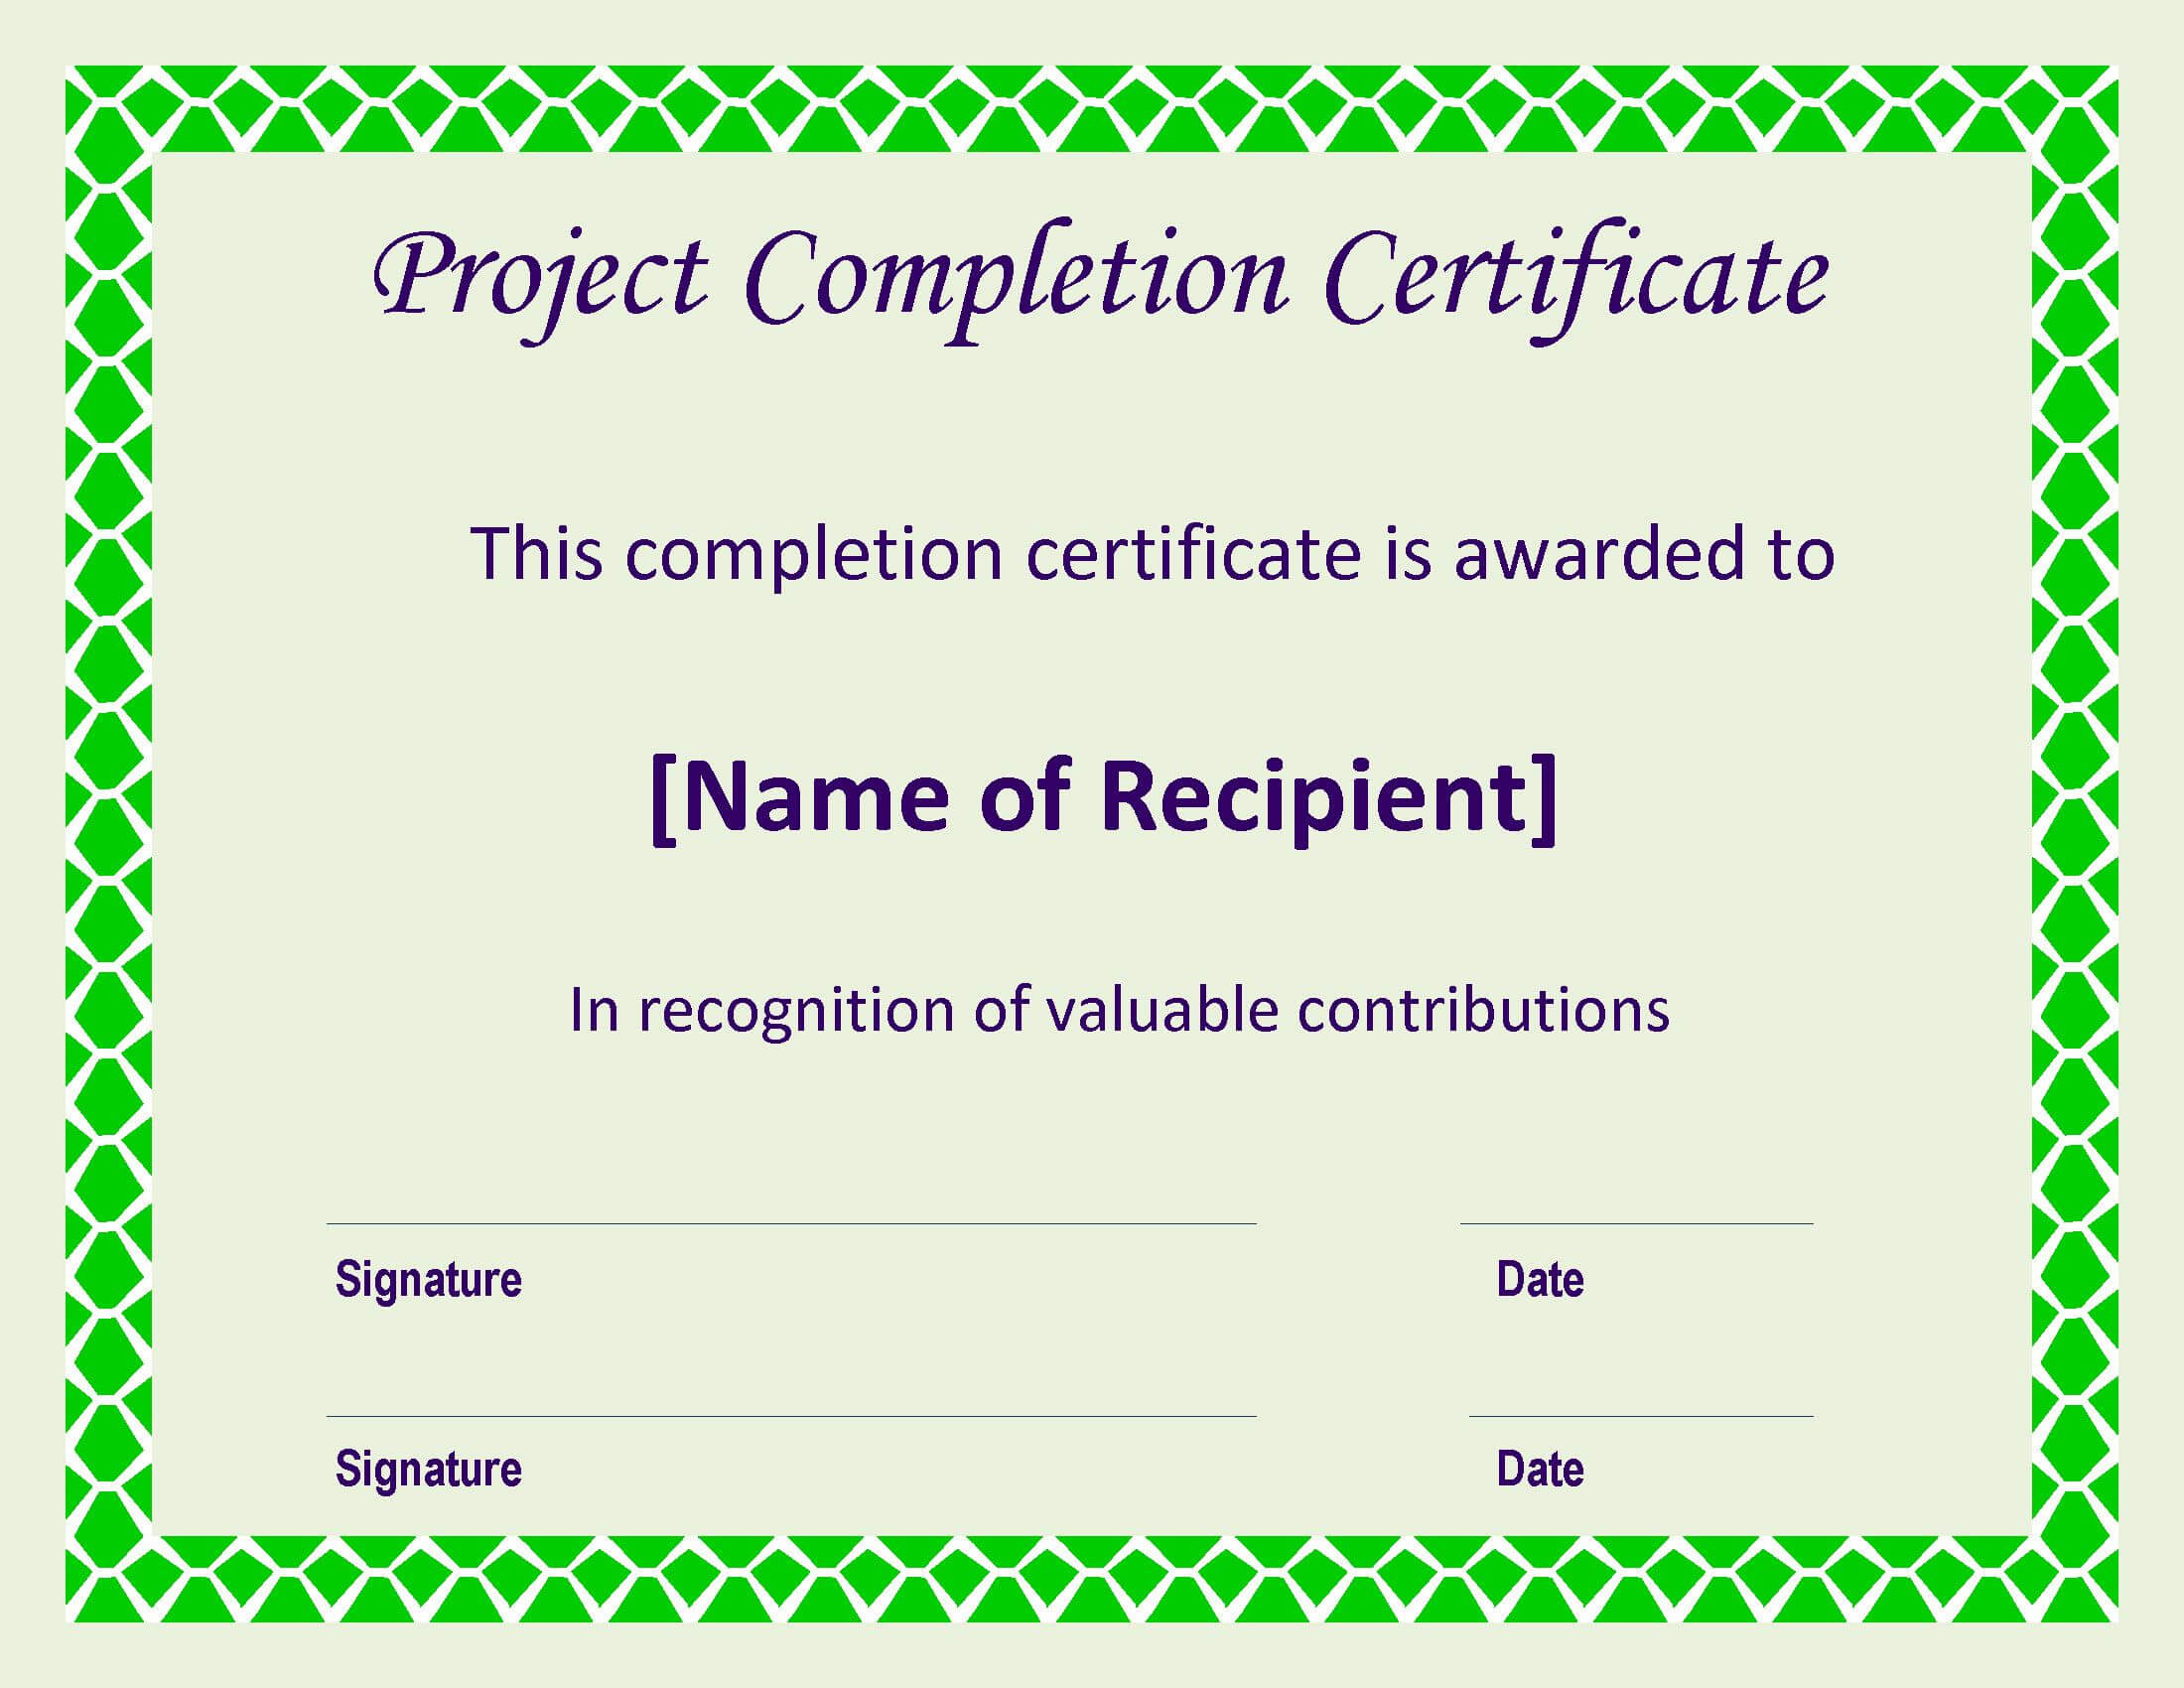 Certificate Of Completion Project | Templates At With Construction Certificate Of Completion Template